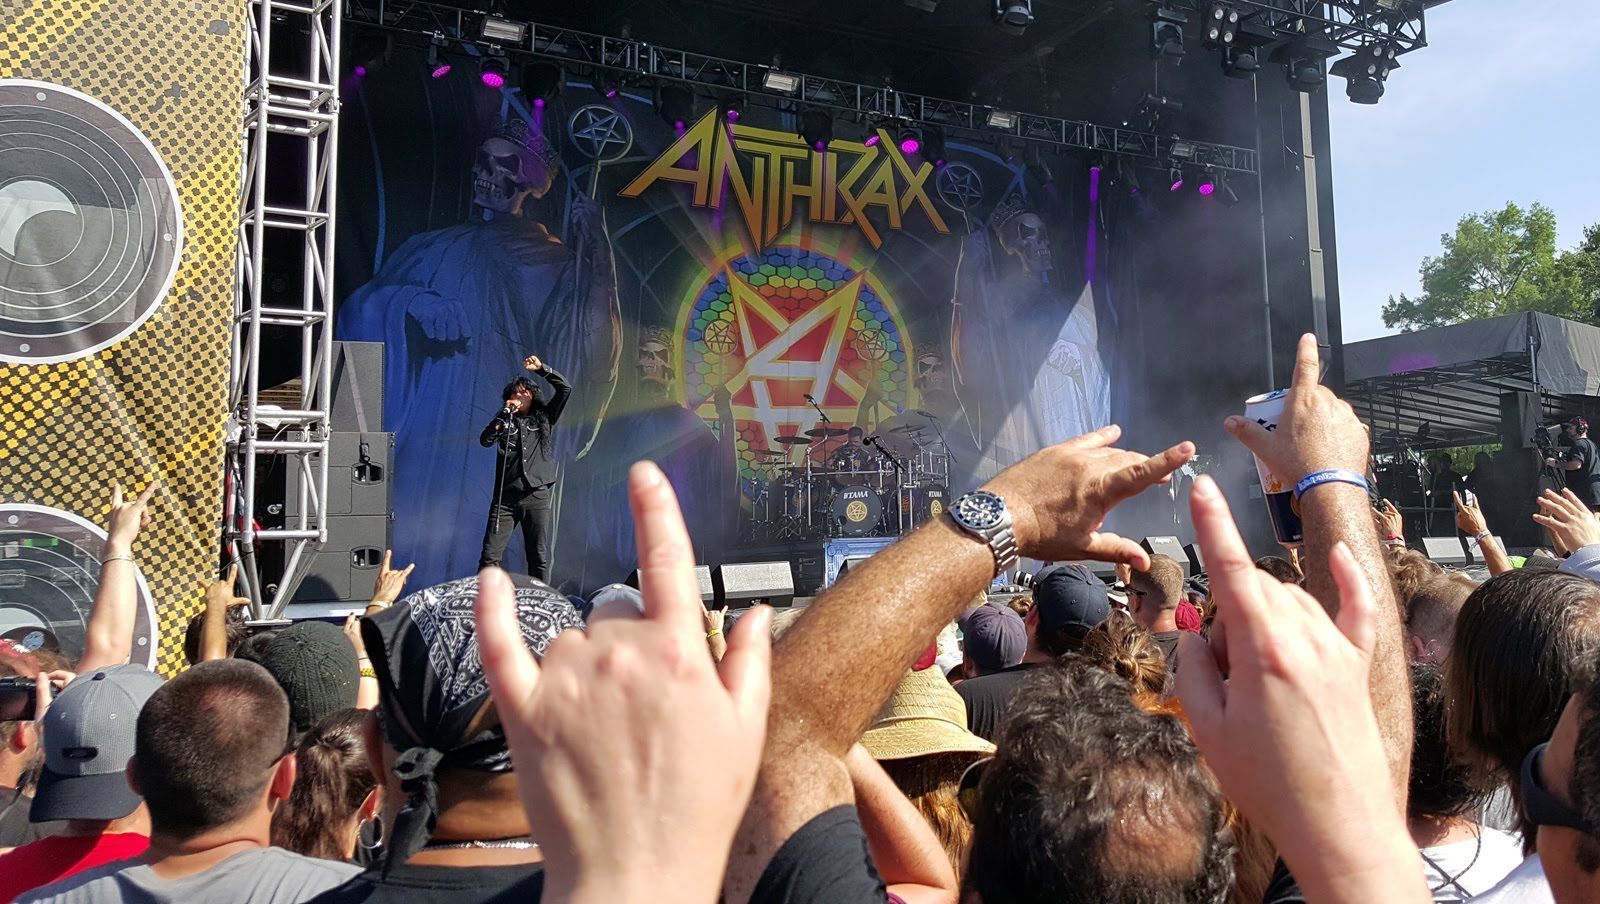 Anthrax - "Caught in a Mosh" (Welcome to Rockville 2016) Jacksonville, FL May 1st